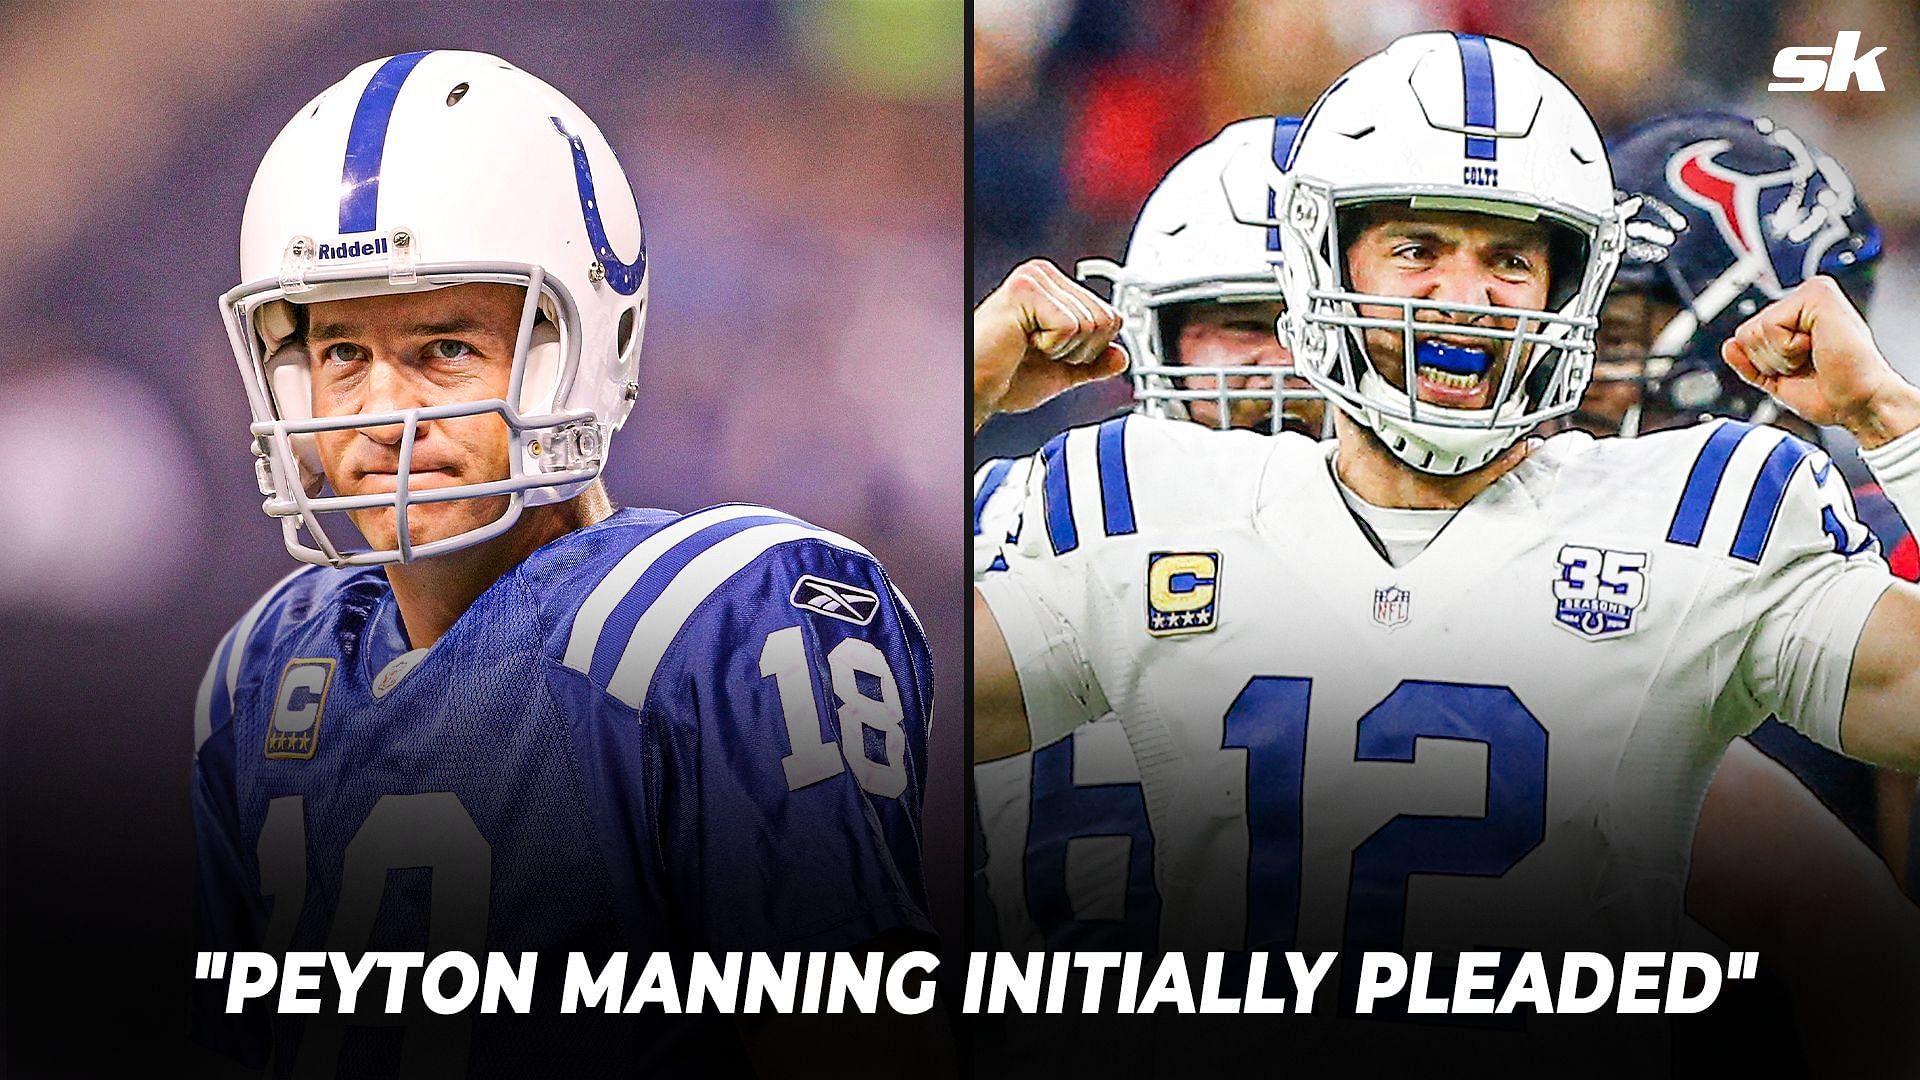 Peyton Manning (left) apparently begged the Colts to let him stay before drafting Andrew Luck.